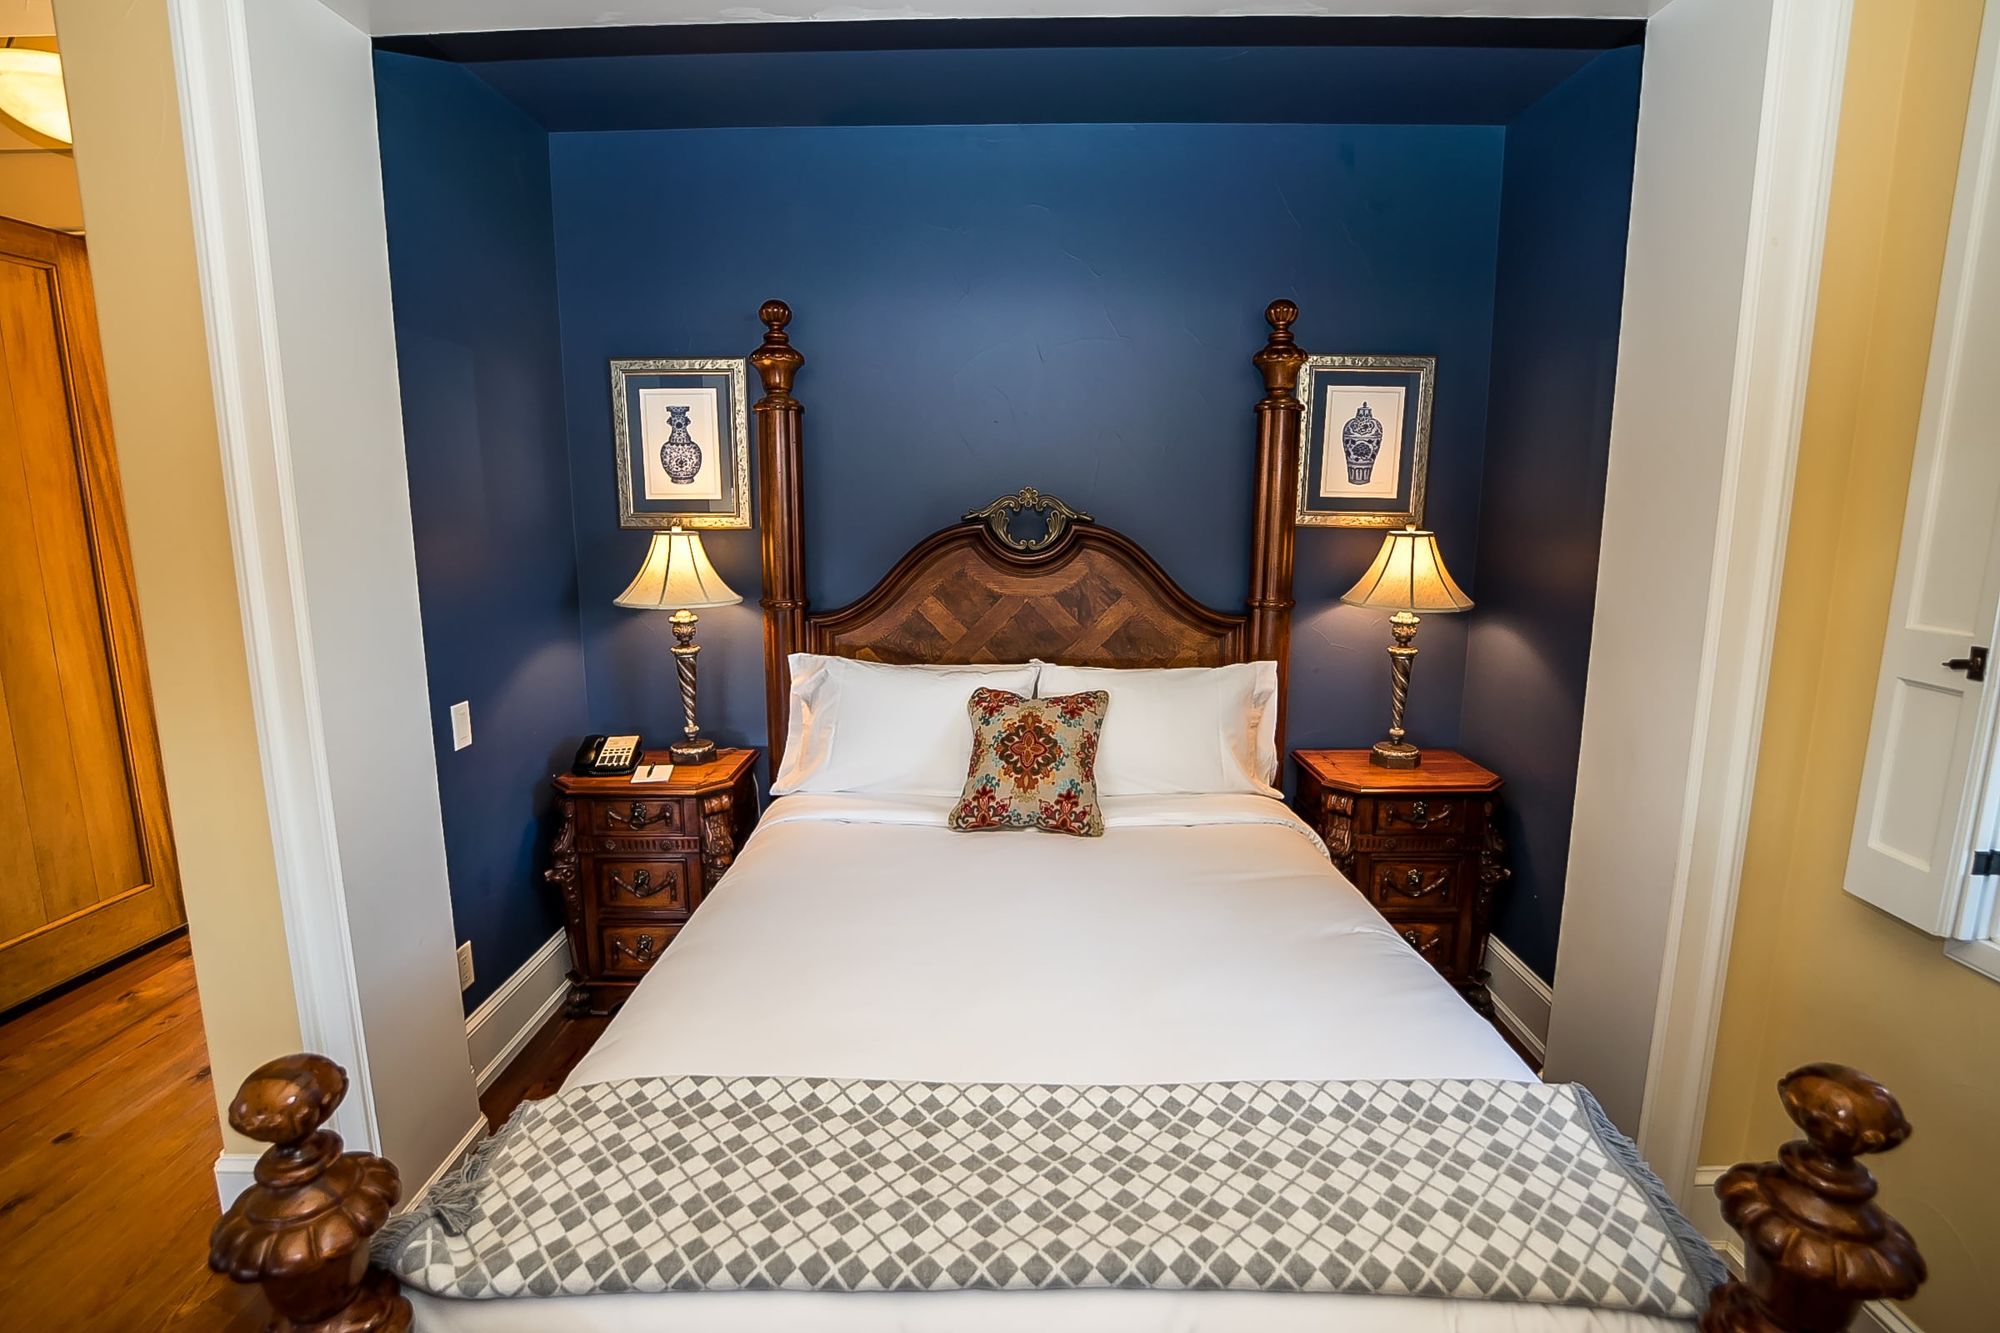 Bed made with white sheets with an accent pillow set in a niche painted dark blue